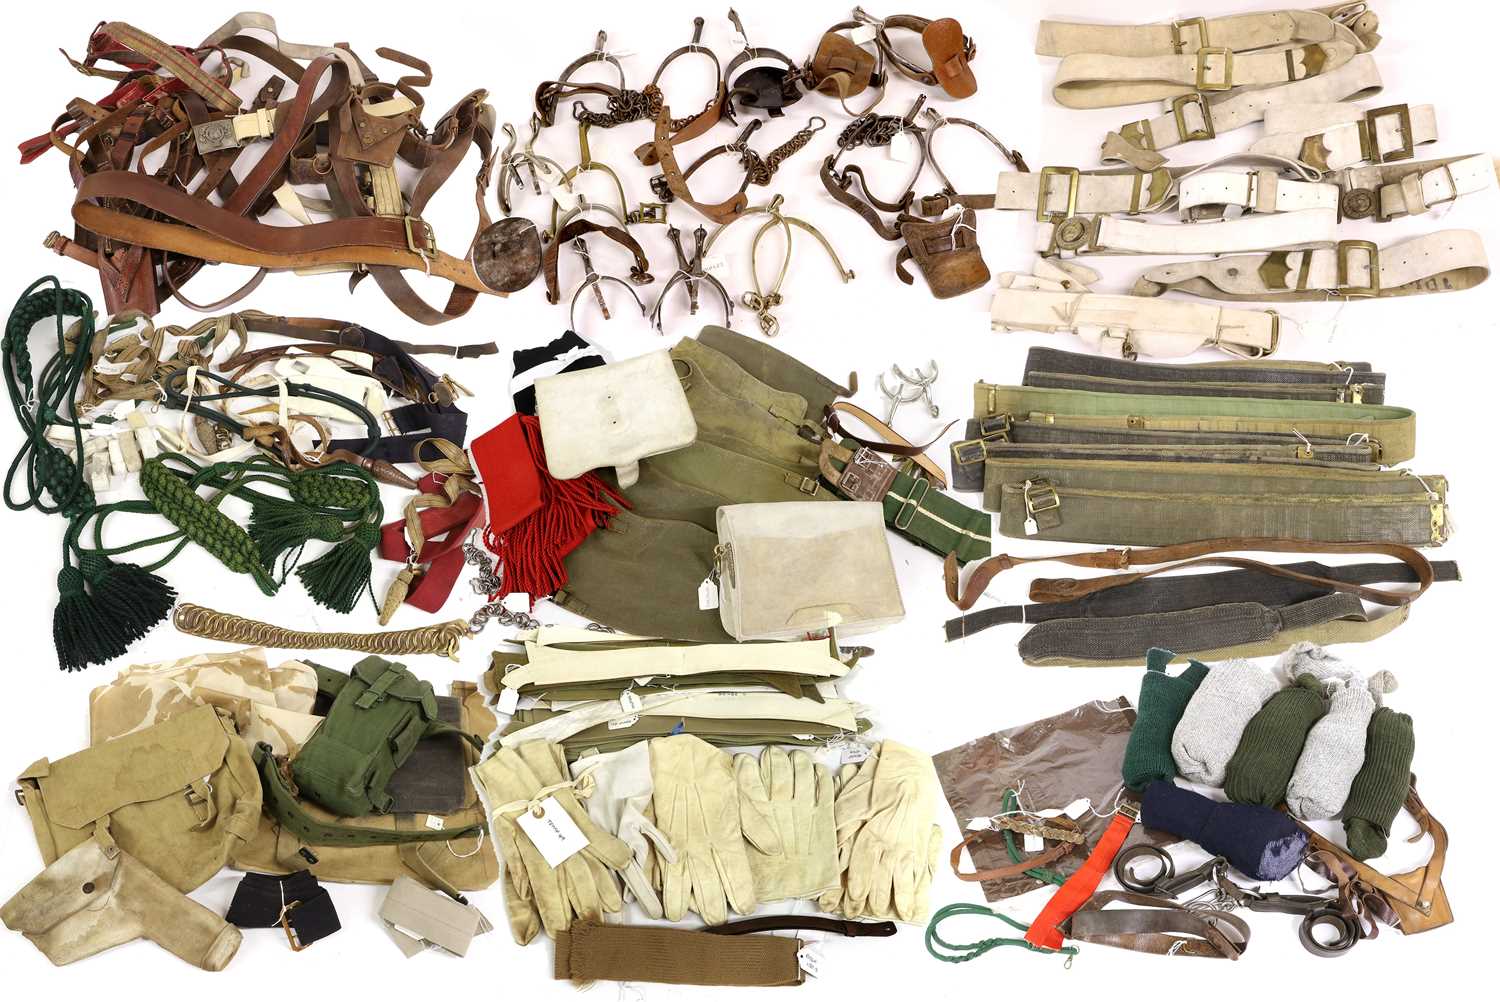 A Quantity of British Uniform Accessories, including Sam Browne belts, sword slings, leather straps,